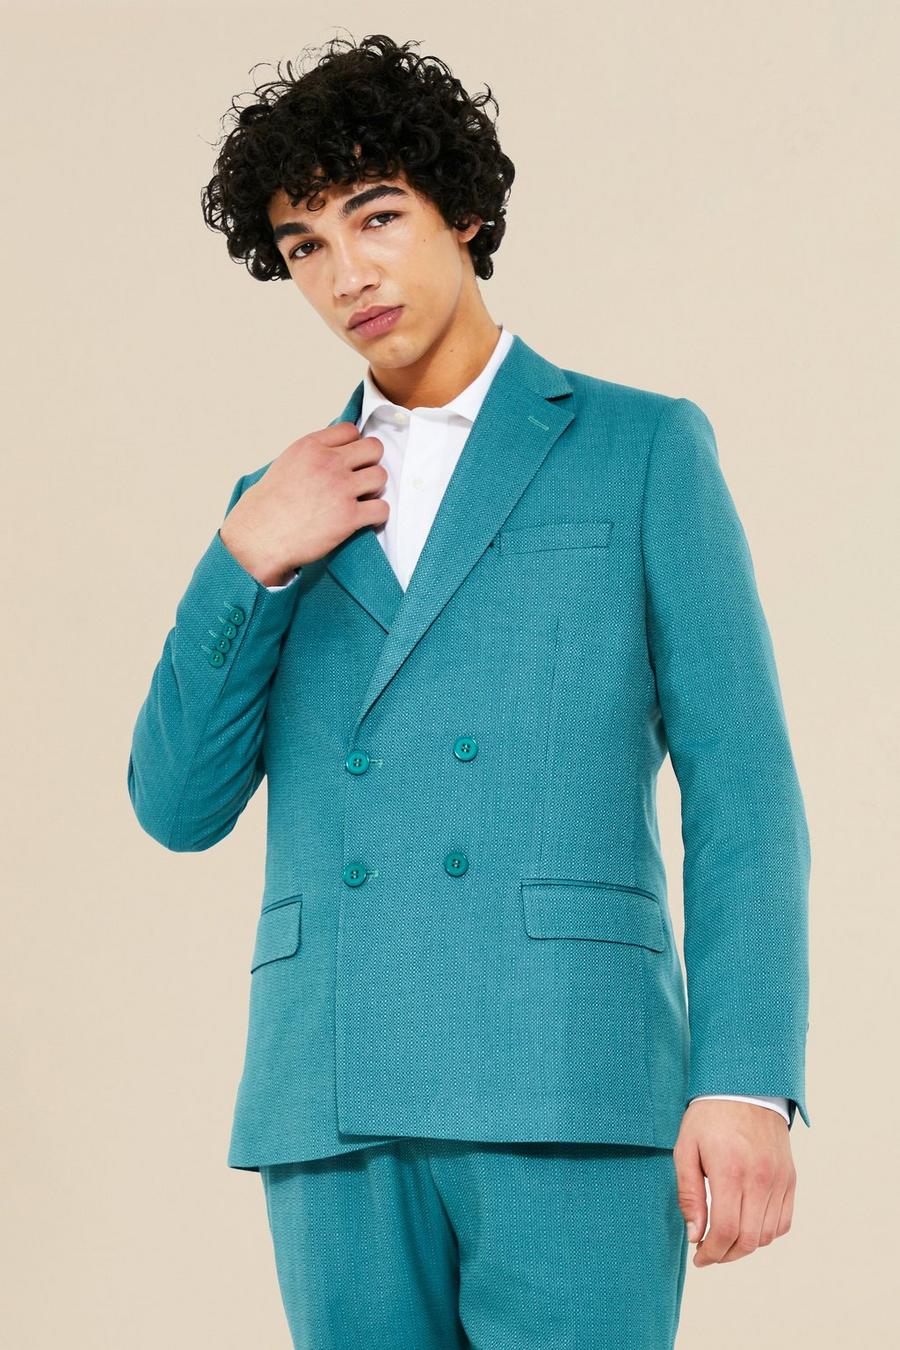 Teal green Double Breasted Slim Textured Suit Jacket